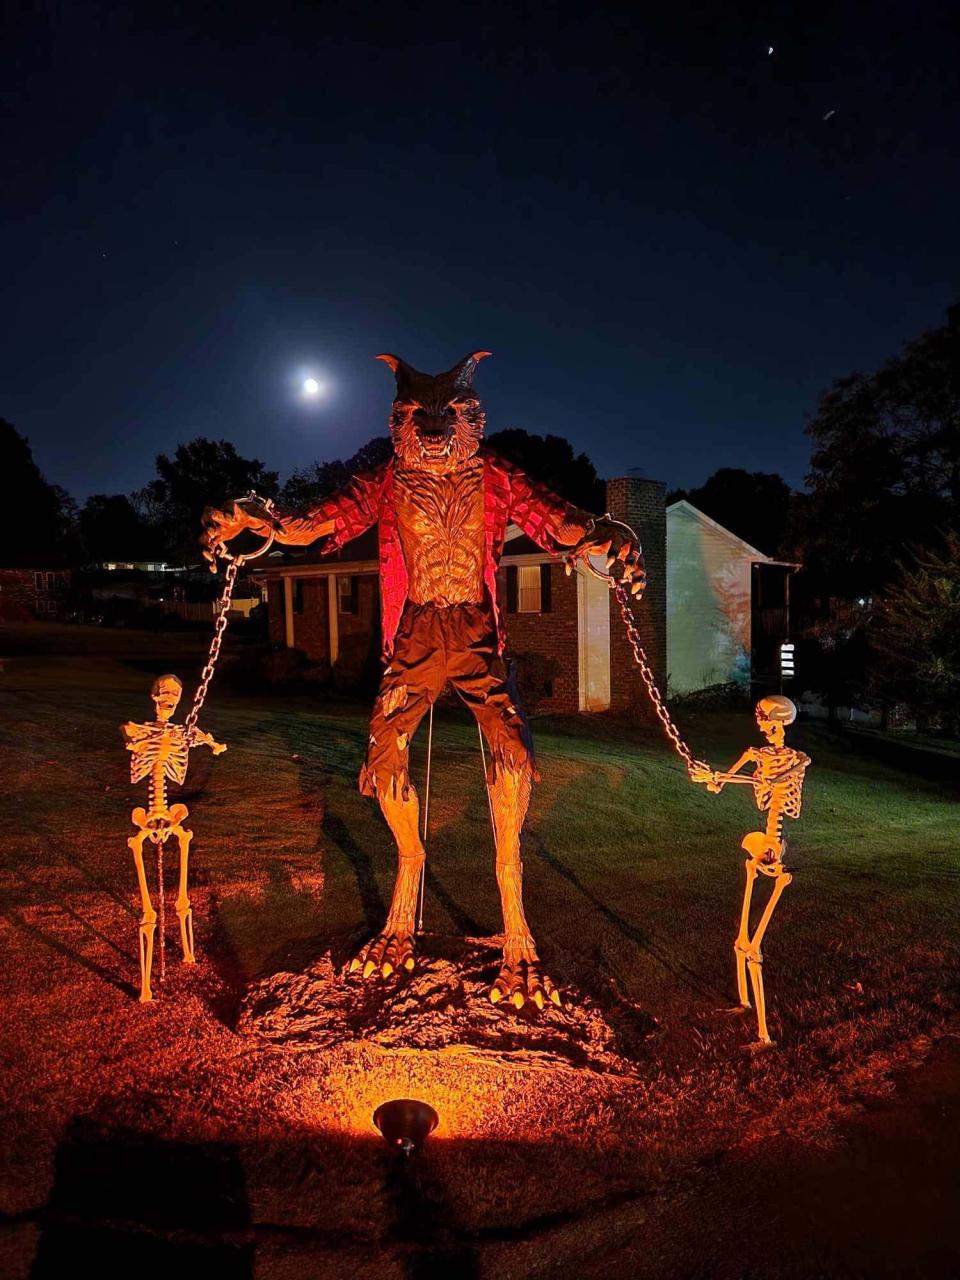 A 12-foot-tall werewolf growls and howls at the McNutt home, welcoming visitors to explore the well decorated yard at 1231 Venido Drive in Knoxville, Tennessee … and scaring away local dogs who refuse to walk by it. Sept. 24, 2023.